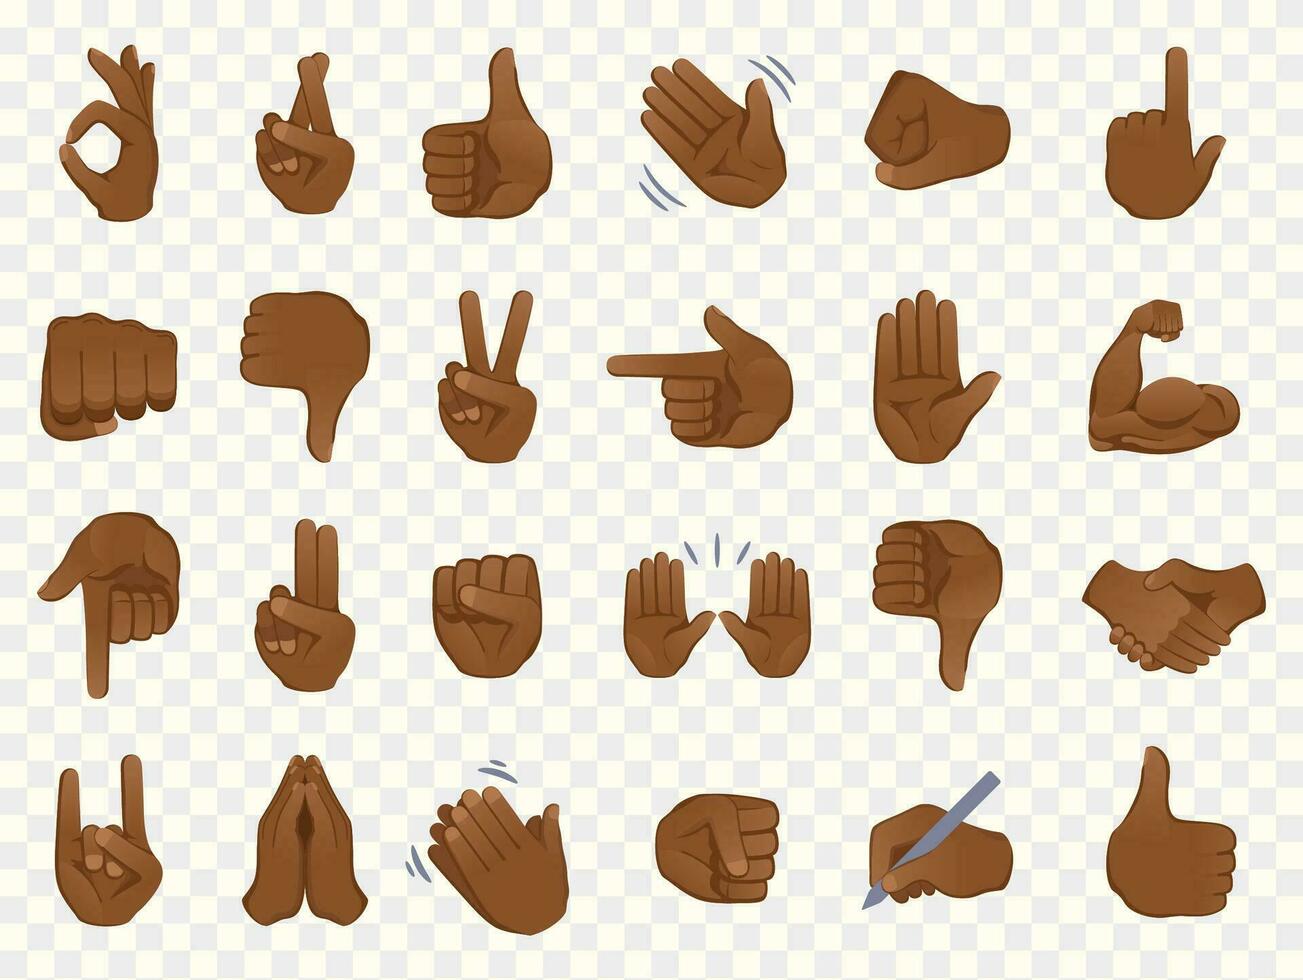 Hand gesture emojis icons collection set. African American dark skin tone symbols isolated vector illustration.